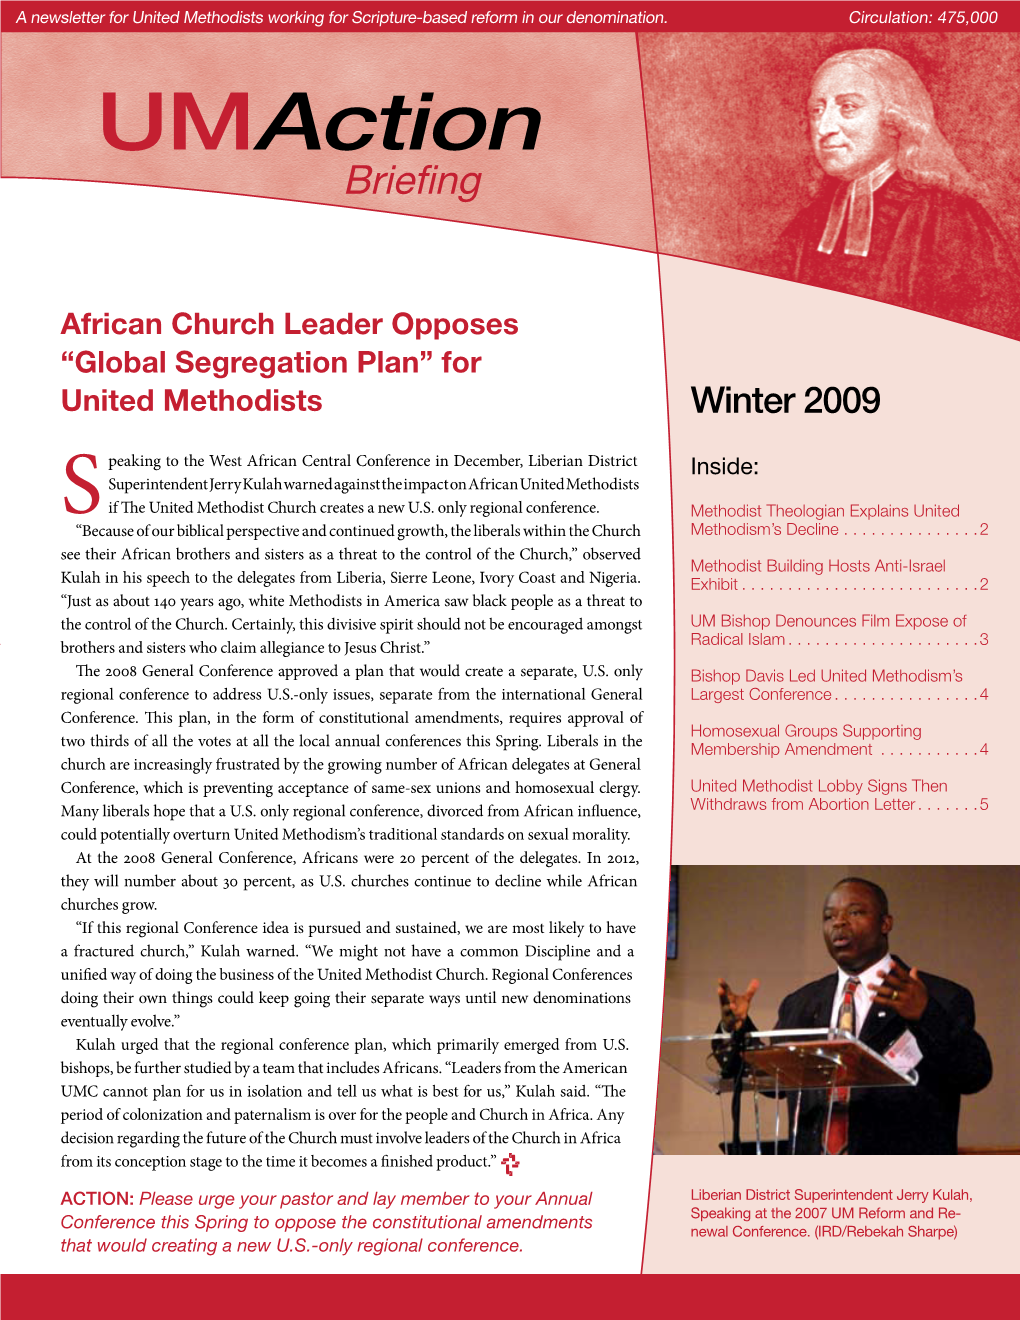 Umaction Briefing ❖ Winter 2009 a Newsletter for United Methodists Working for Scripture-Based Reform in Our Denomination